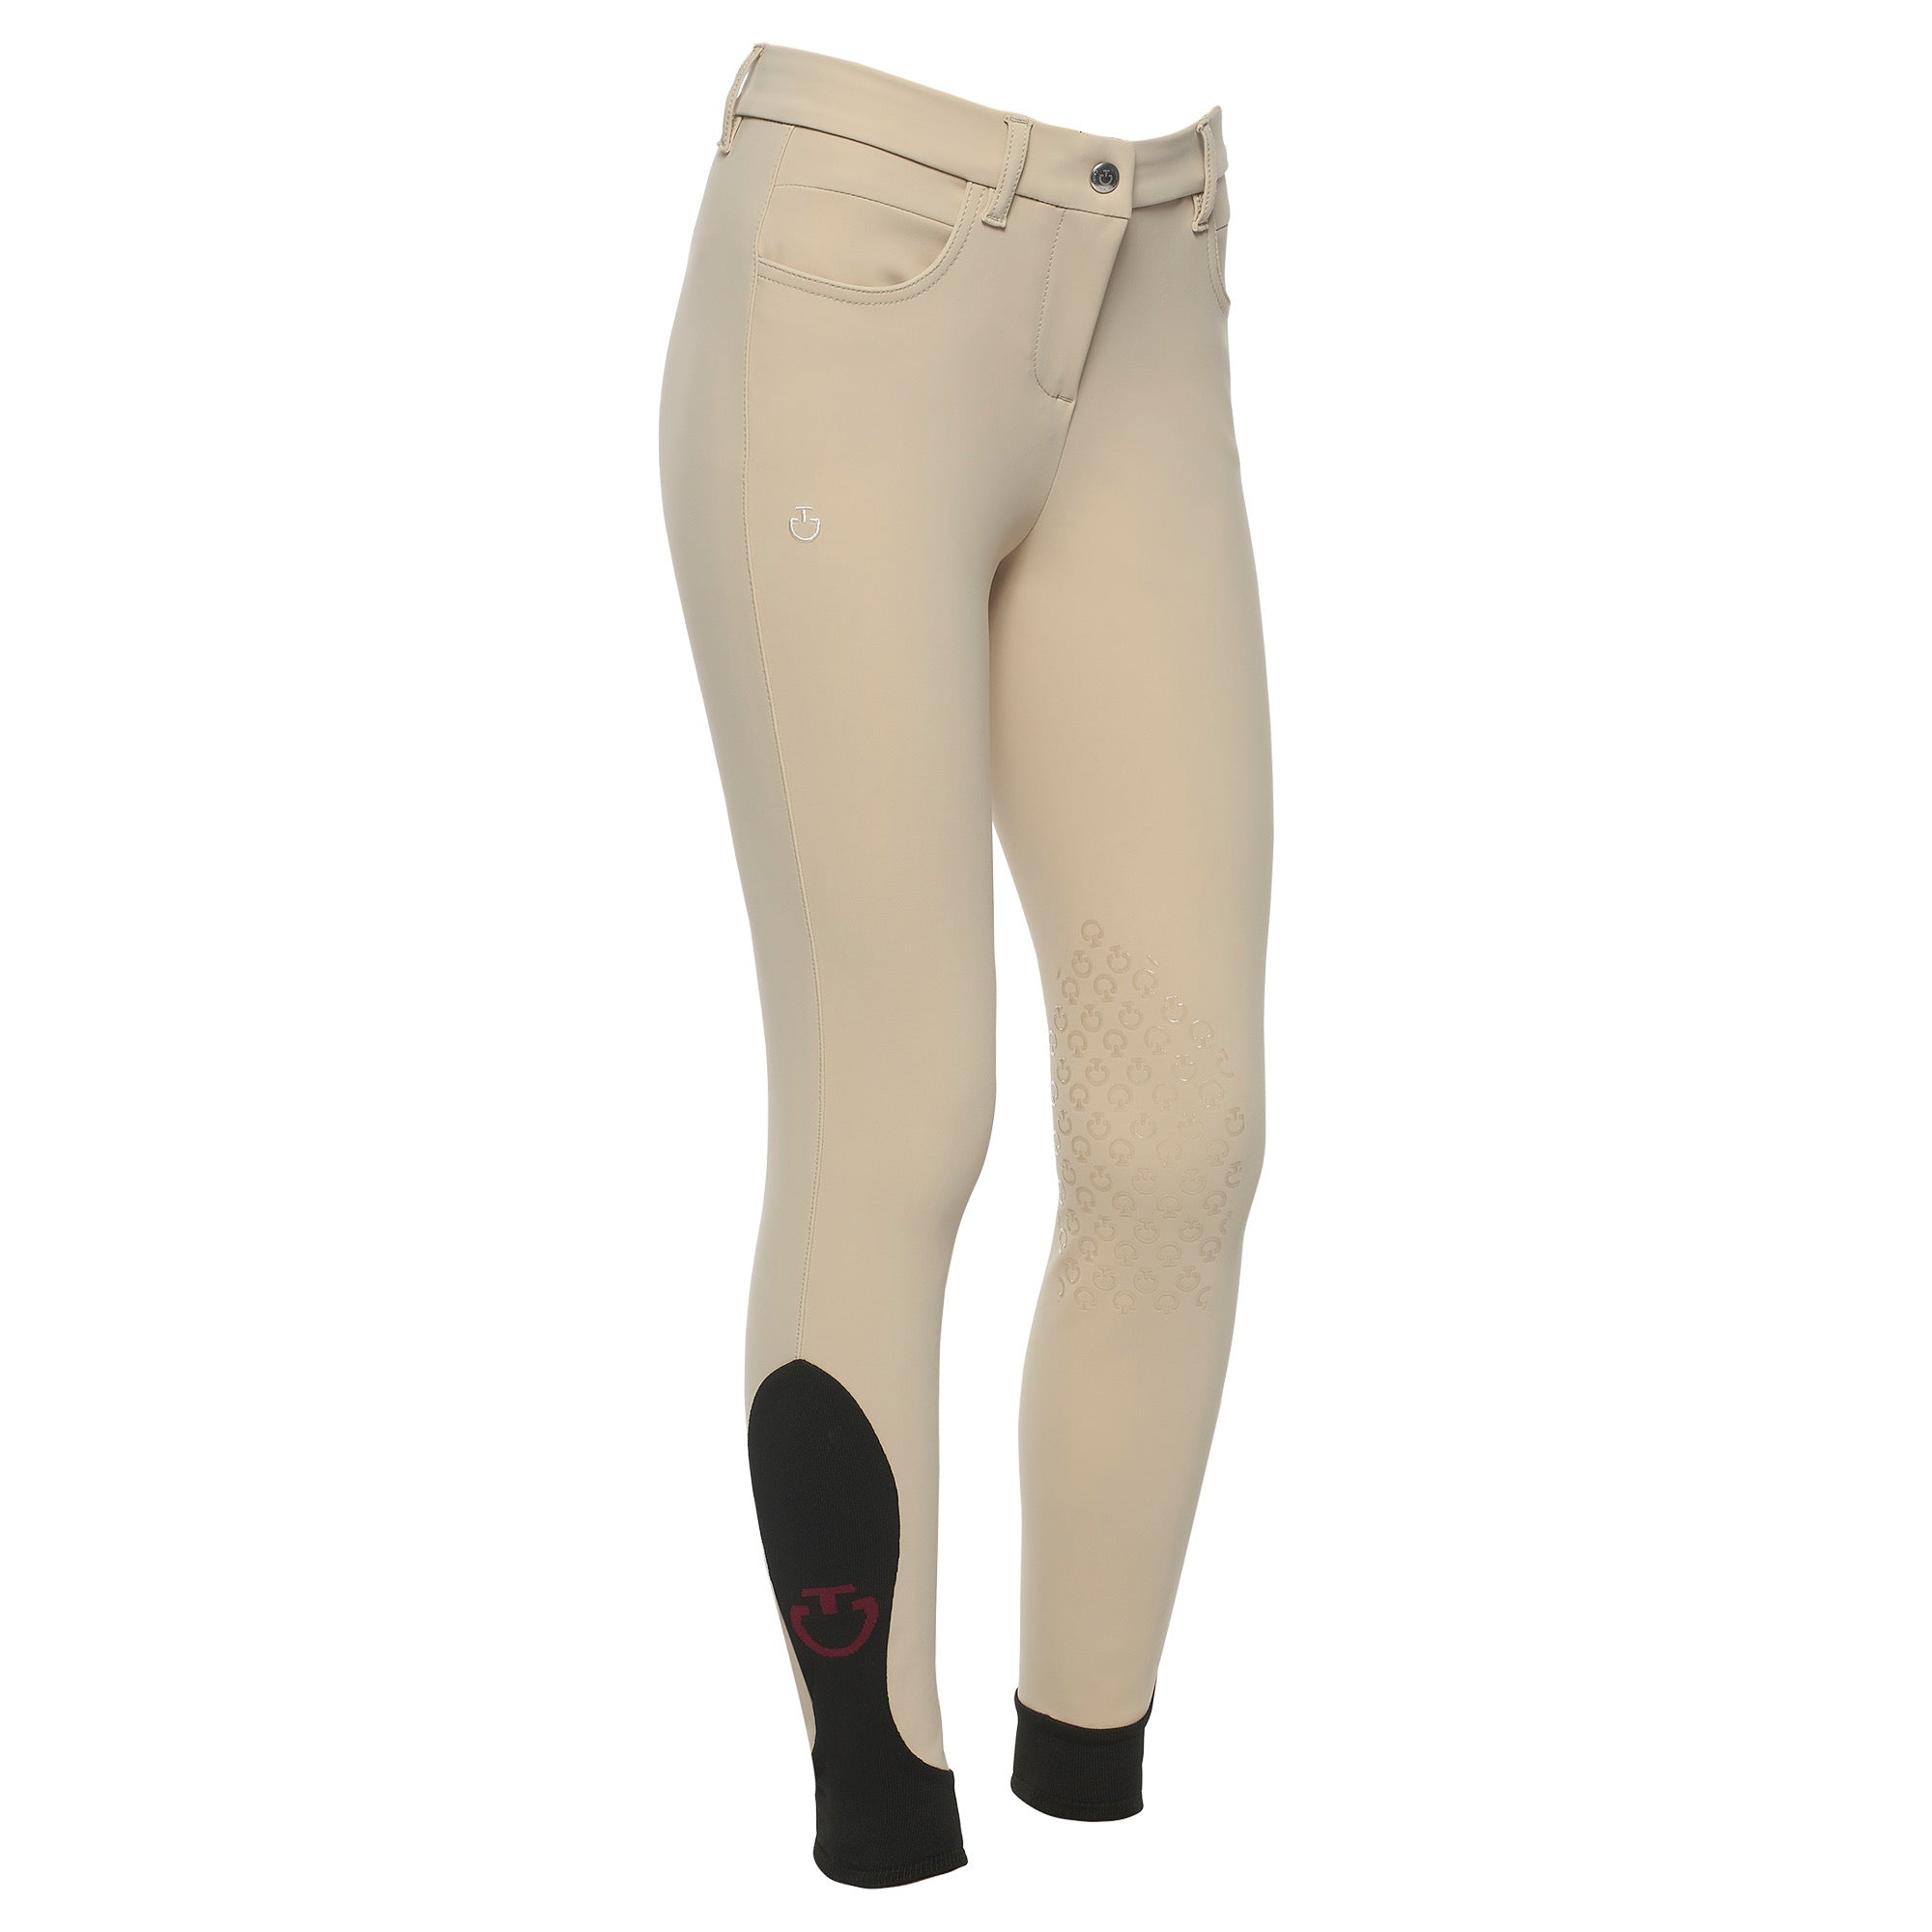 Cavalleria Toscana Girl's Knee Grip Breeches - Riding Breeches by Gee Gee Equine 